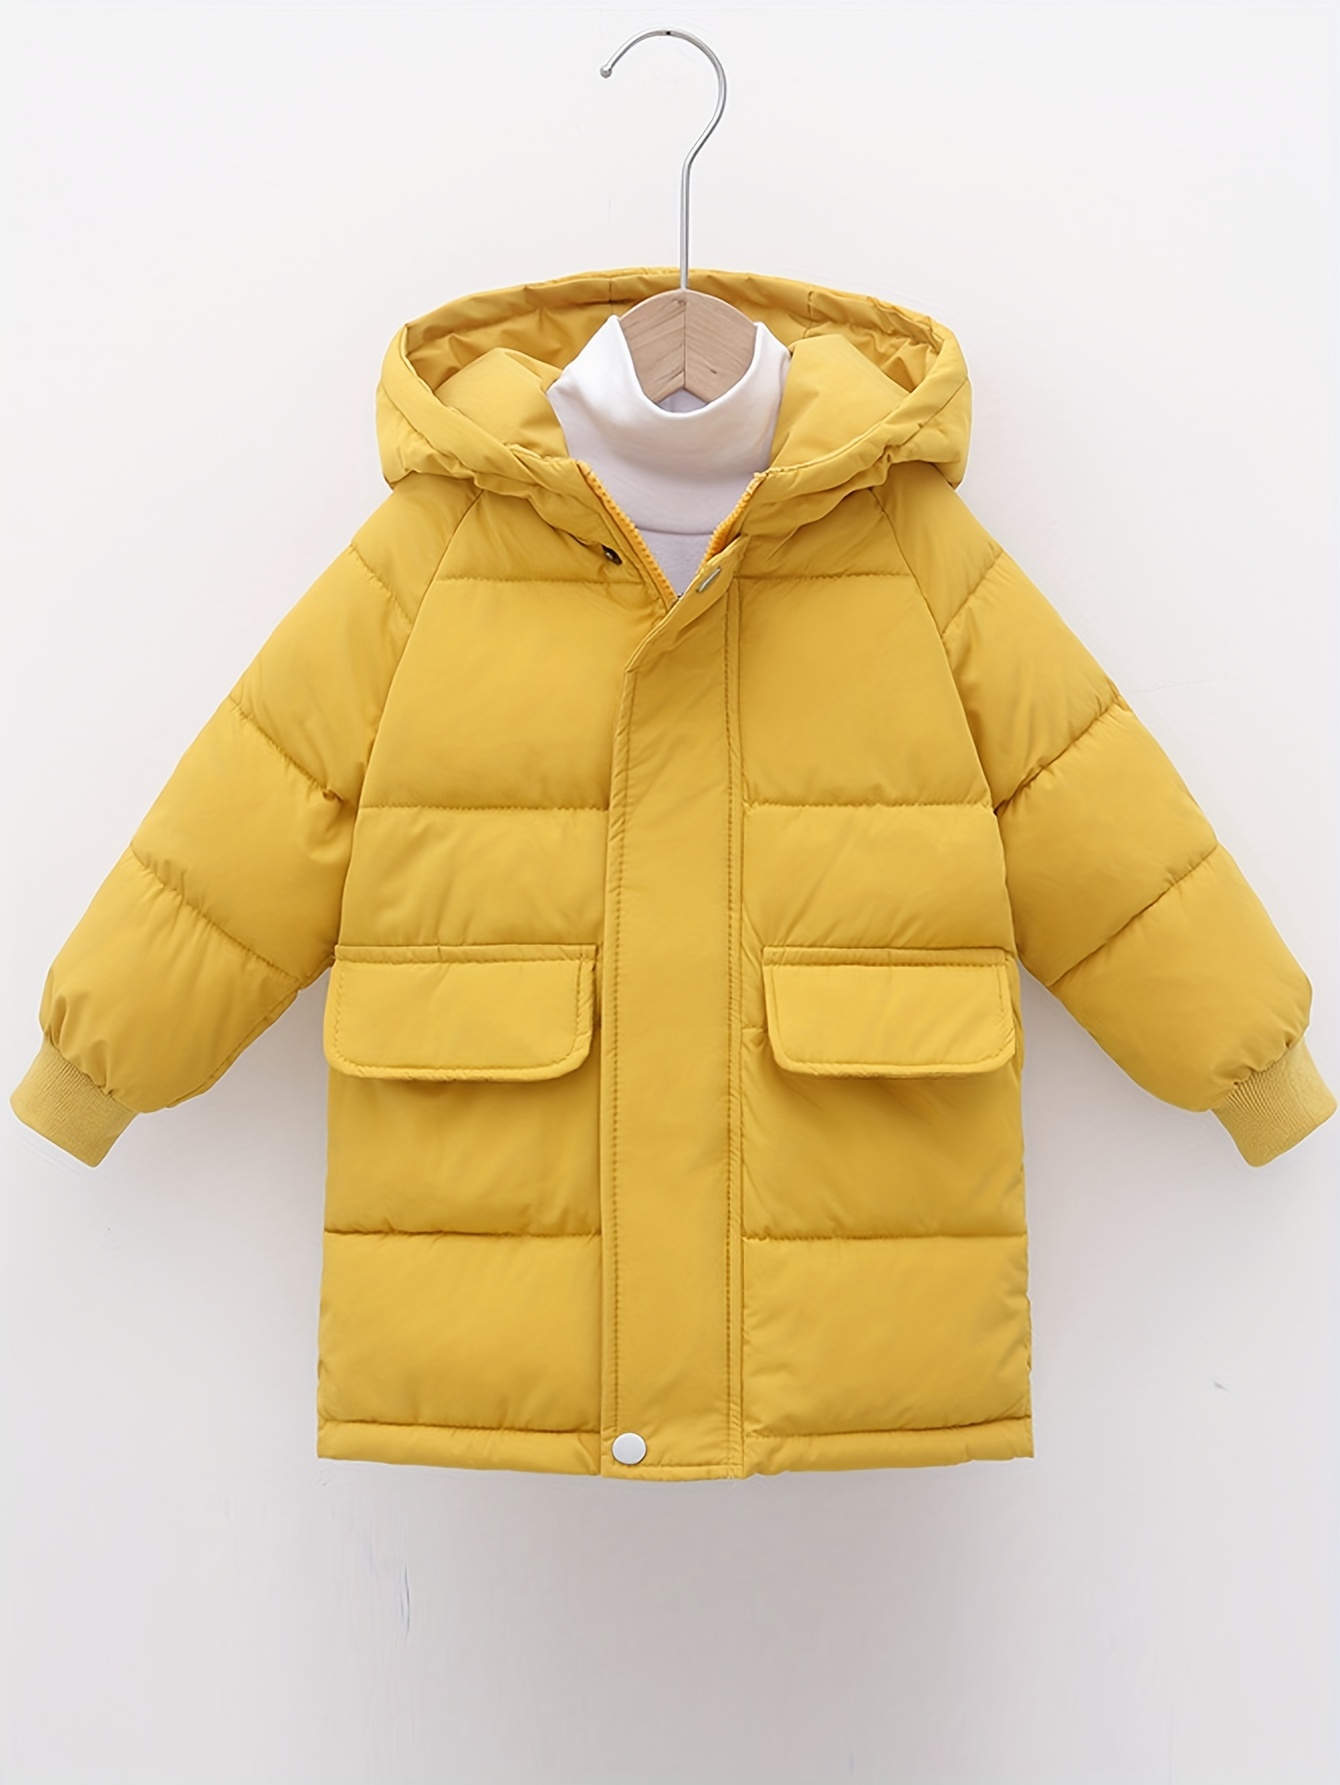 Boys/ Girls Winter Warm Cotton-padded Hooded Coat Outdoor Snow Suit, Teen  Kids Clothing For Winter/ Fall